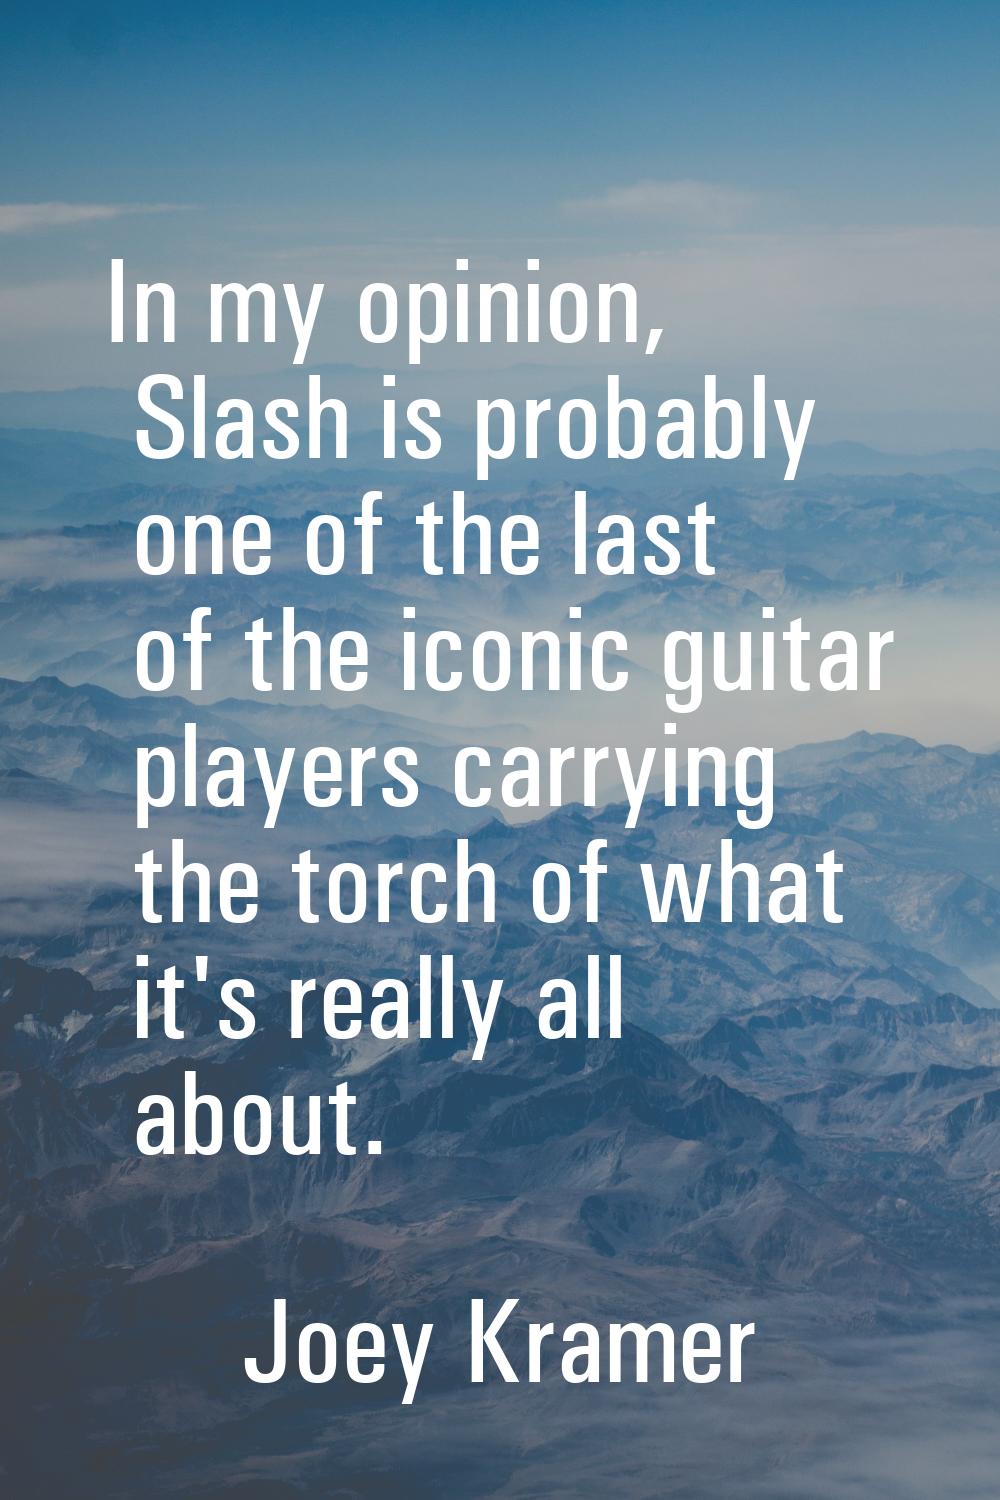 In my opinion, Slash is probably one of the last of the iconic guitar players carrying the torch of